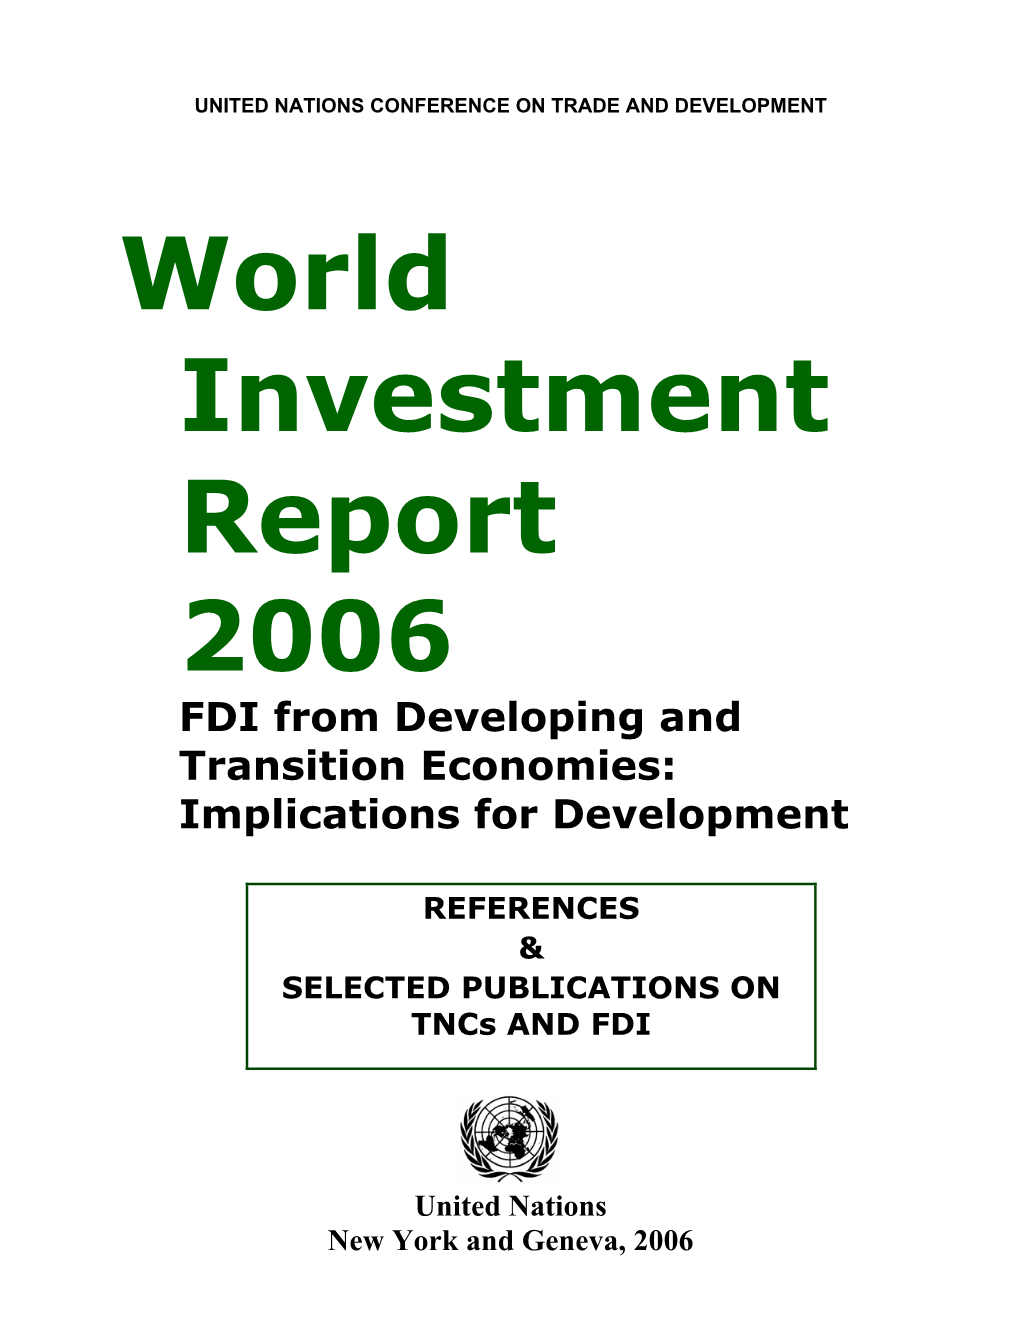 World Investment Report 2006 FDI from Developing and Transition Economies: Implications for Development